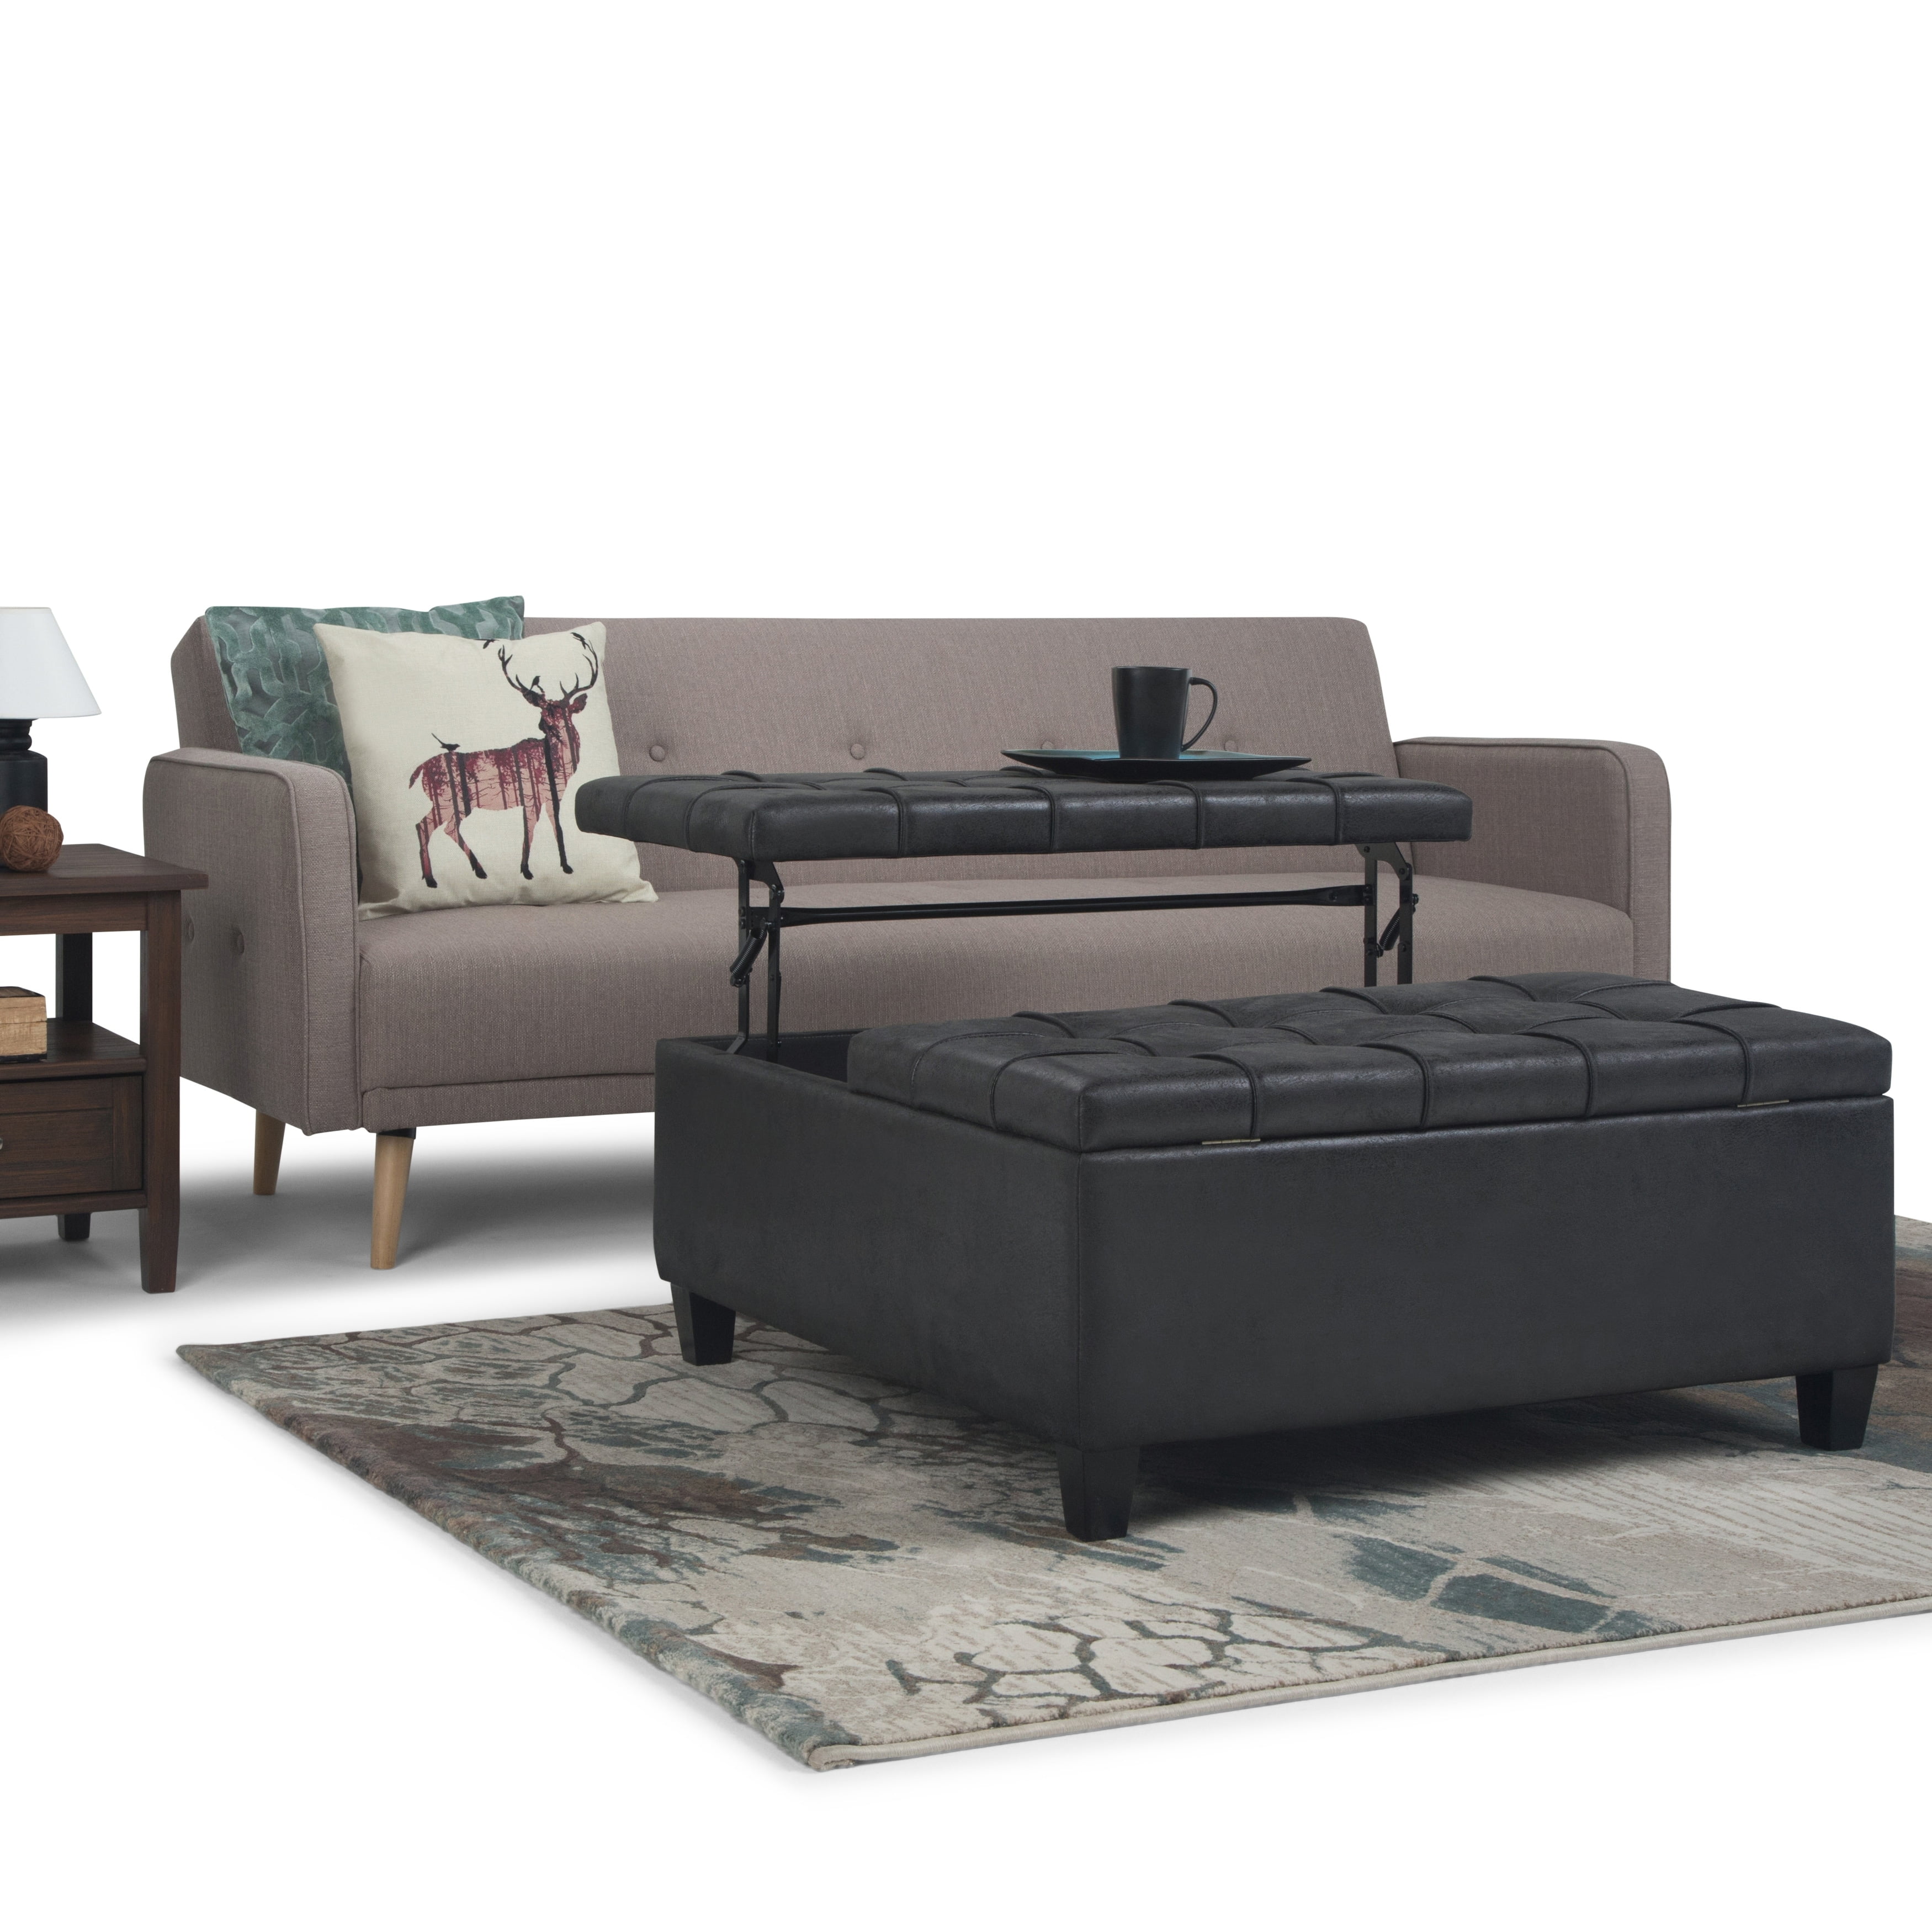 Wyndenhall Elliot Transitional Table, Black Leather Square Ottoman Coffee Table